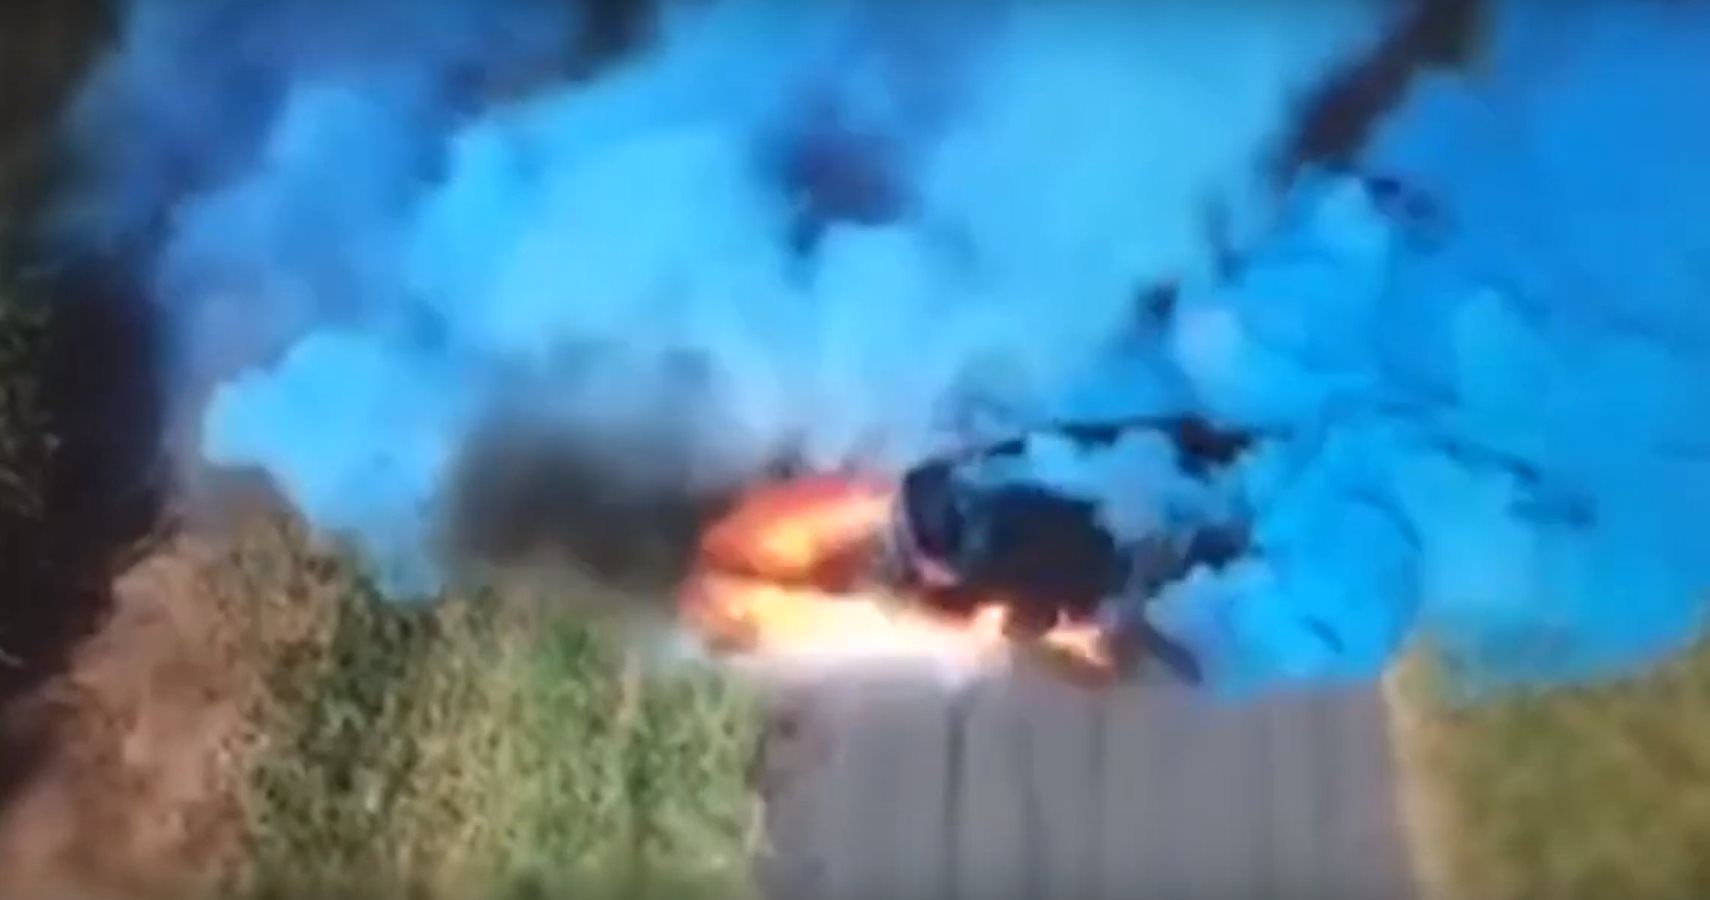 Gender Reveal Goes Horribly Wrong As Family Car Catches Fire